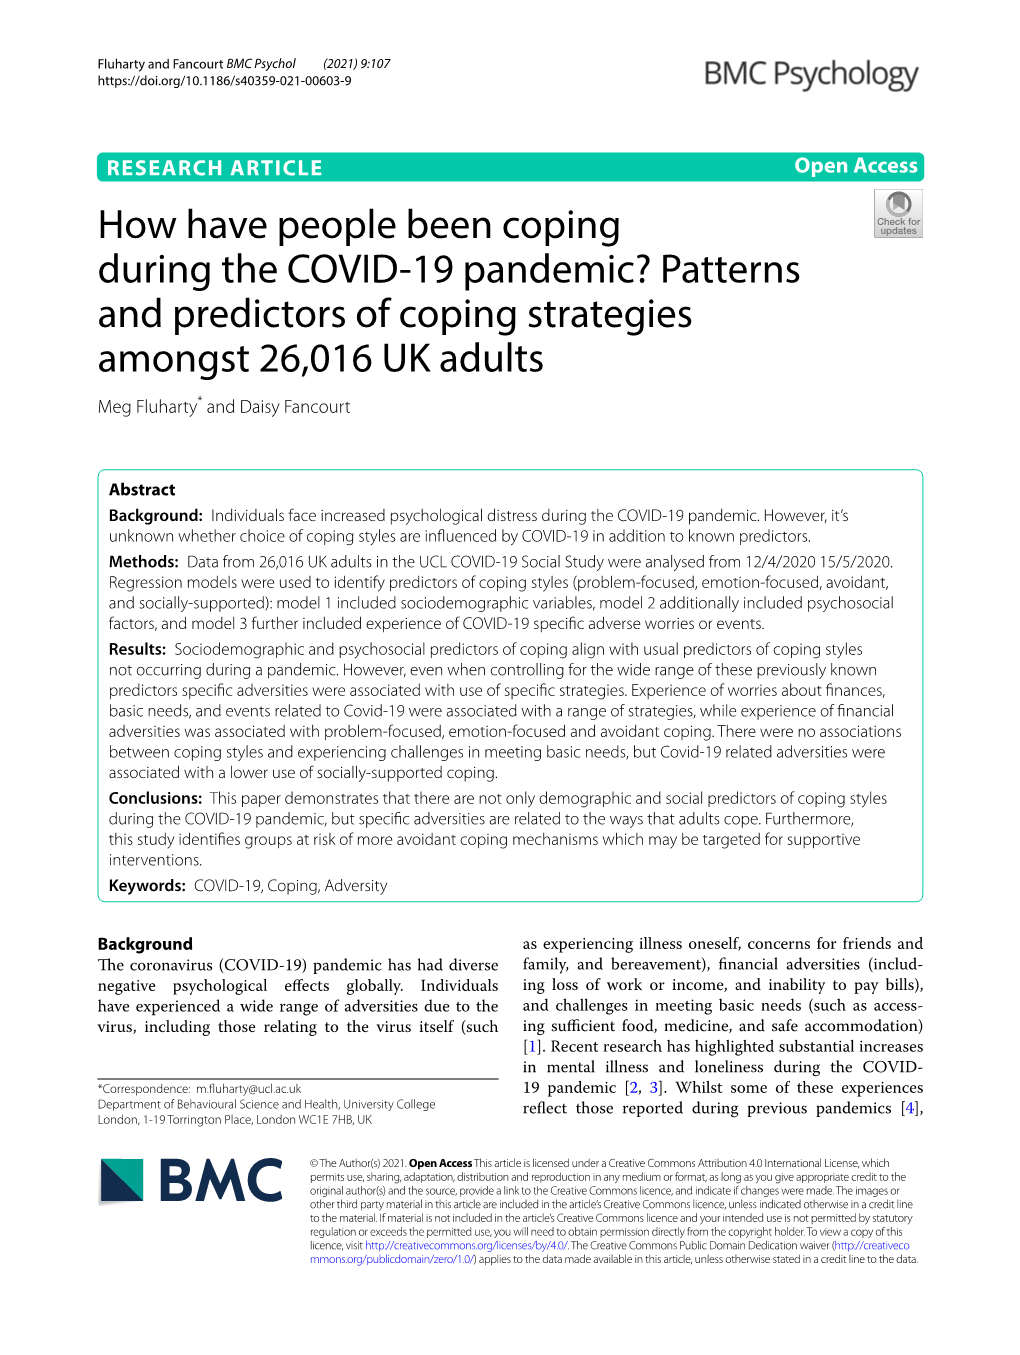 Patterns and Predictors of Coping Strategies Amongst 26,016 UK Adults Meg Fluharty* and Daisy Fancourt